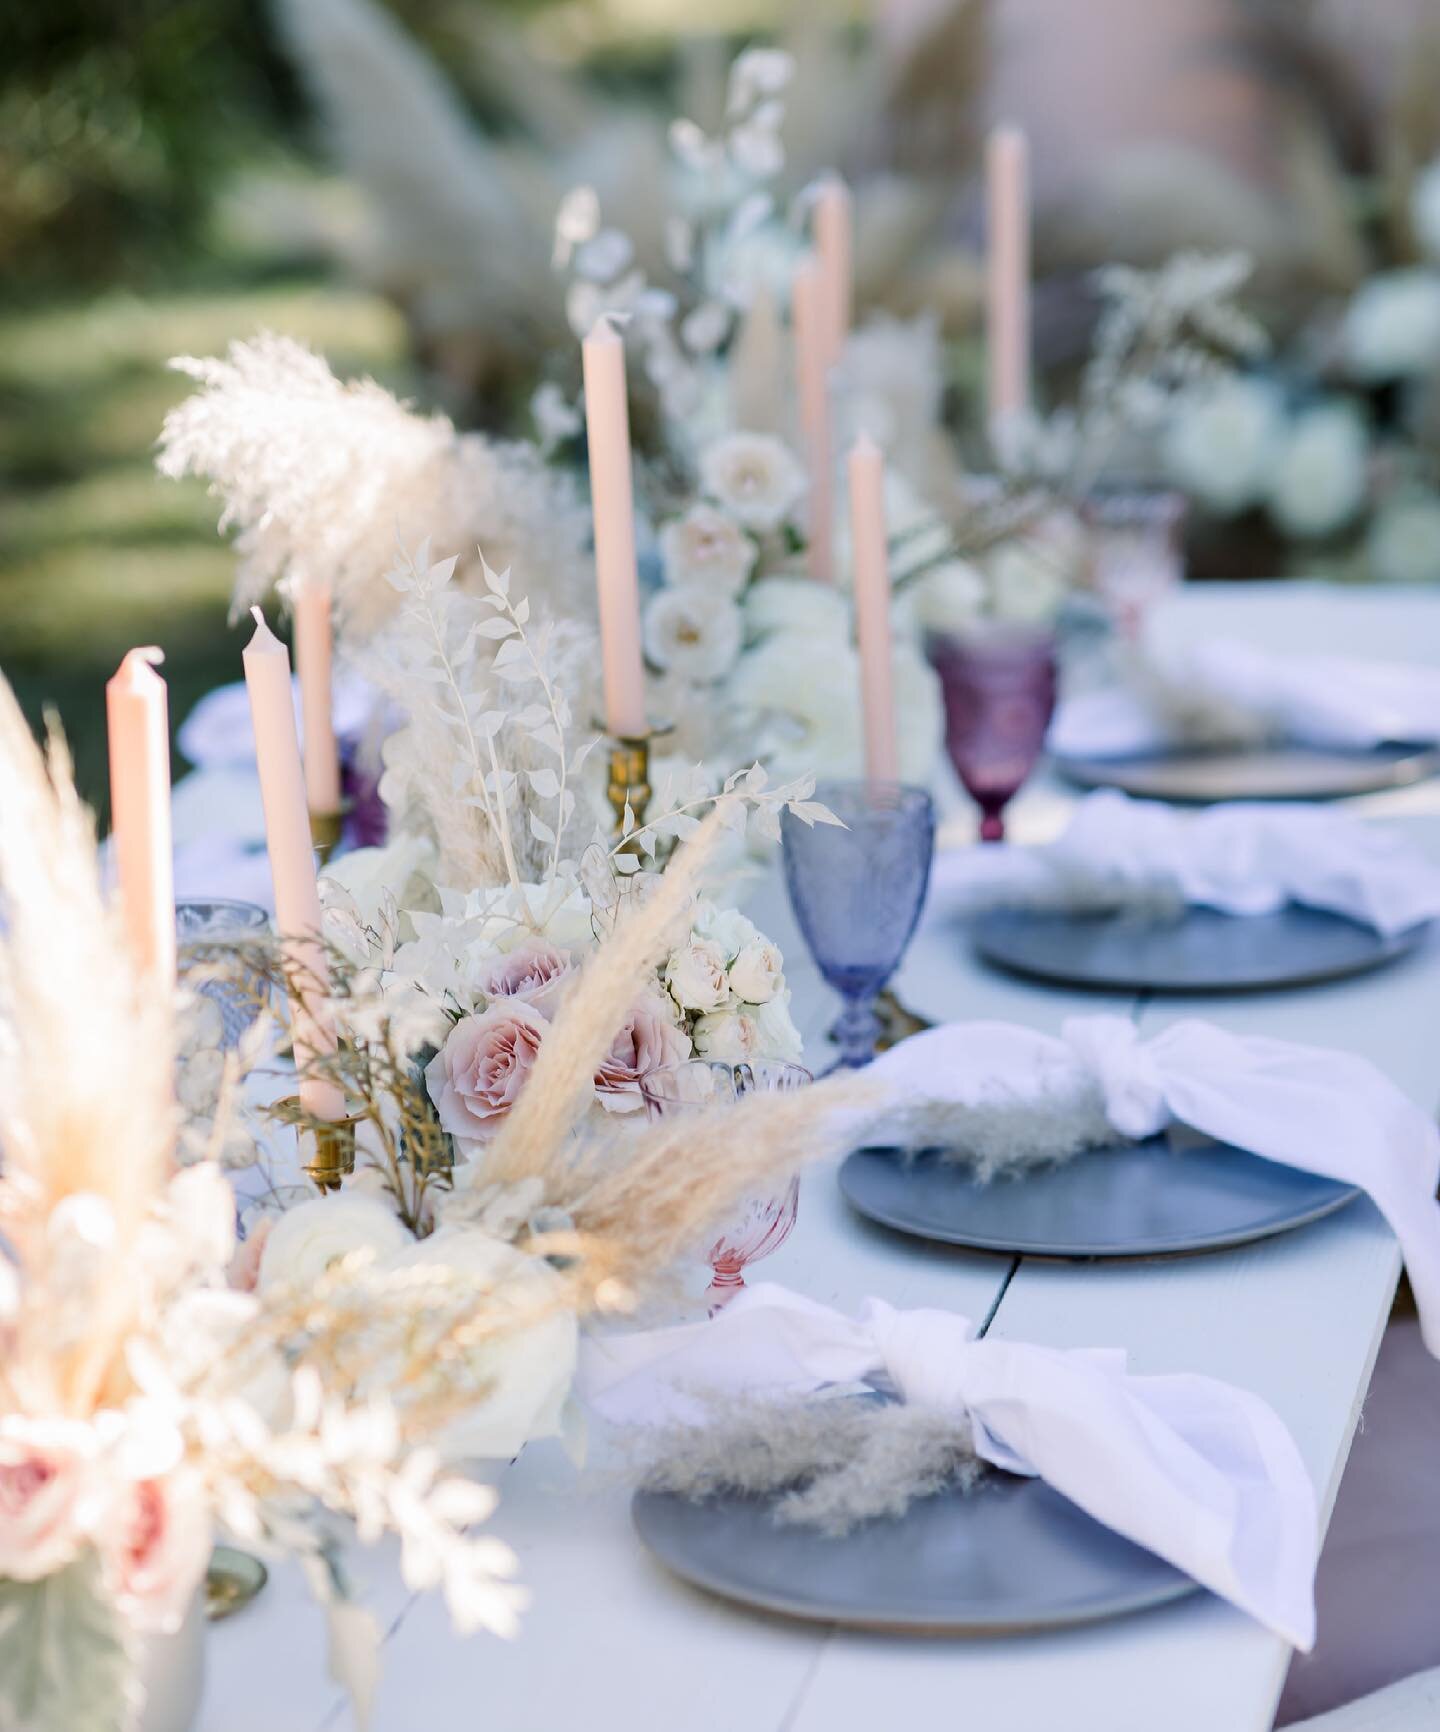 This warm weather has us thinking about dreamy outdoor setups like this one ✨

This boho-design concept is perfect for bridal showers, outdoor picnics, bridal luncheons and birthday parties!

Floral: @tenpointfloraldesign 
Rentals/Design: @milieu.dec